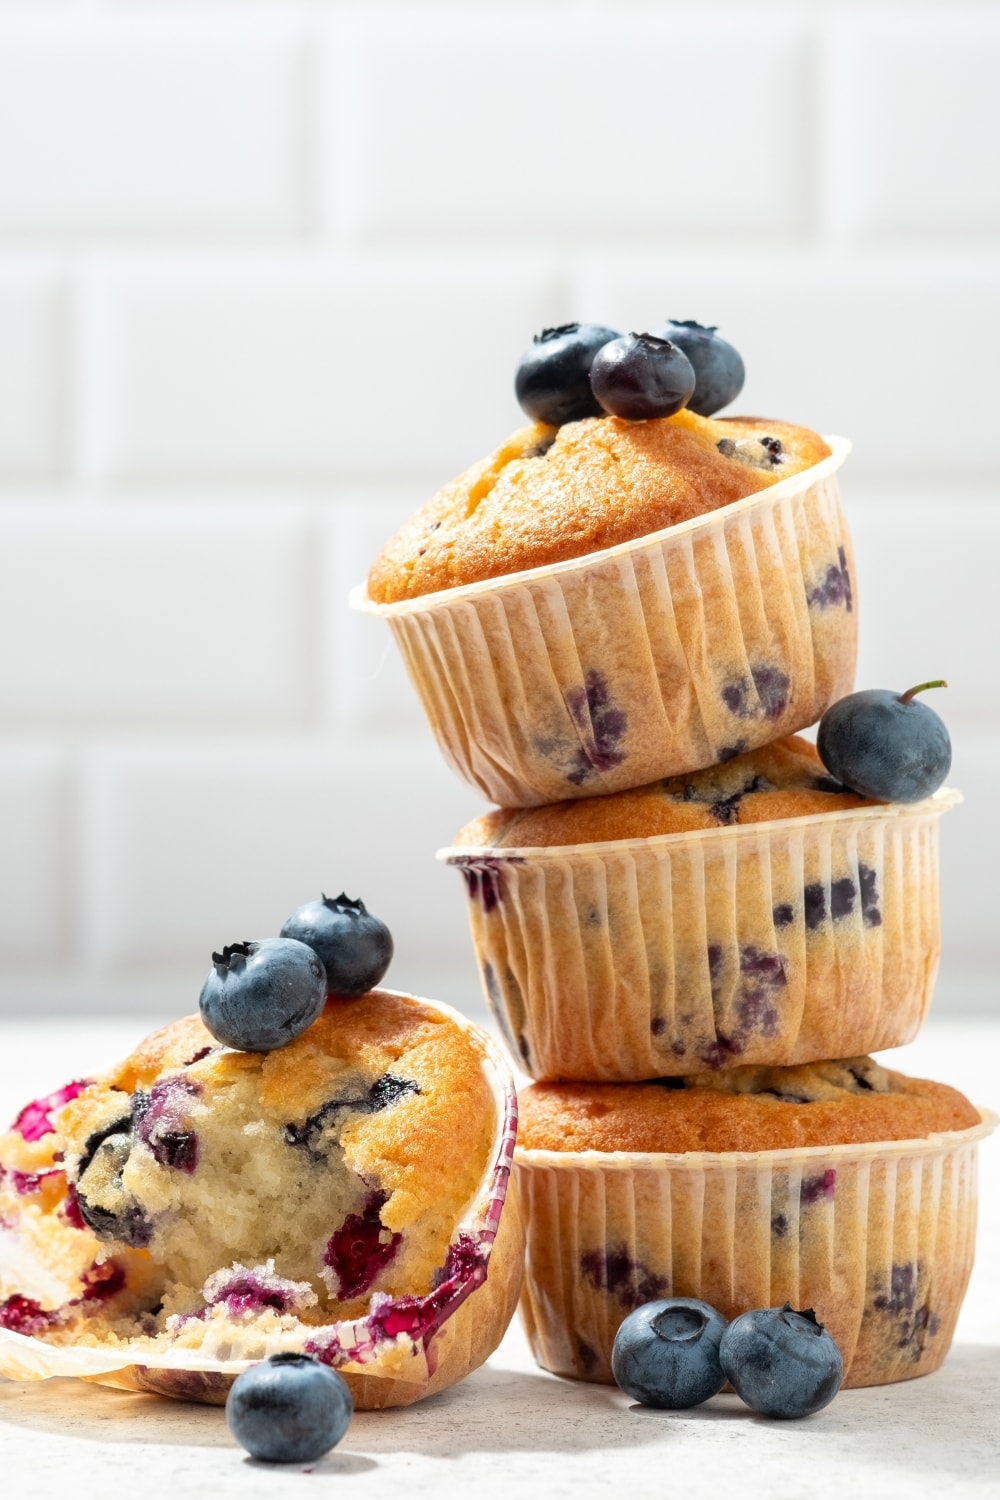 4 Fluffy Jordan Marsh Blueberry Muffins, One with a Big Bite Taken Out of It and Lots of Fresh Blueberries On and Around the Muffins